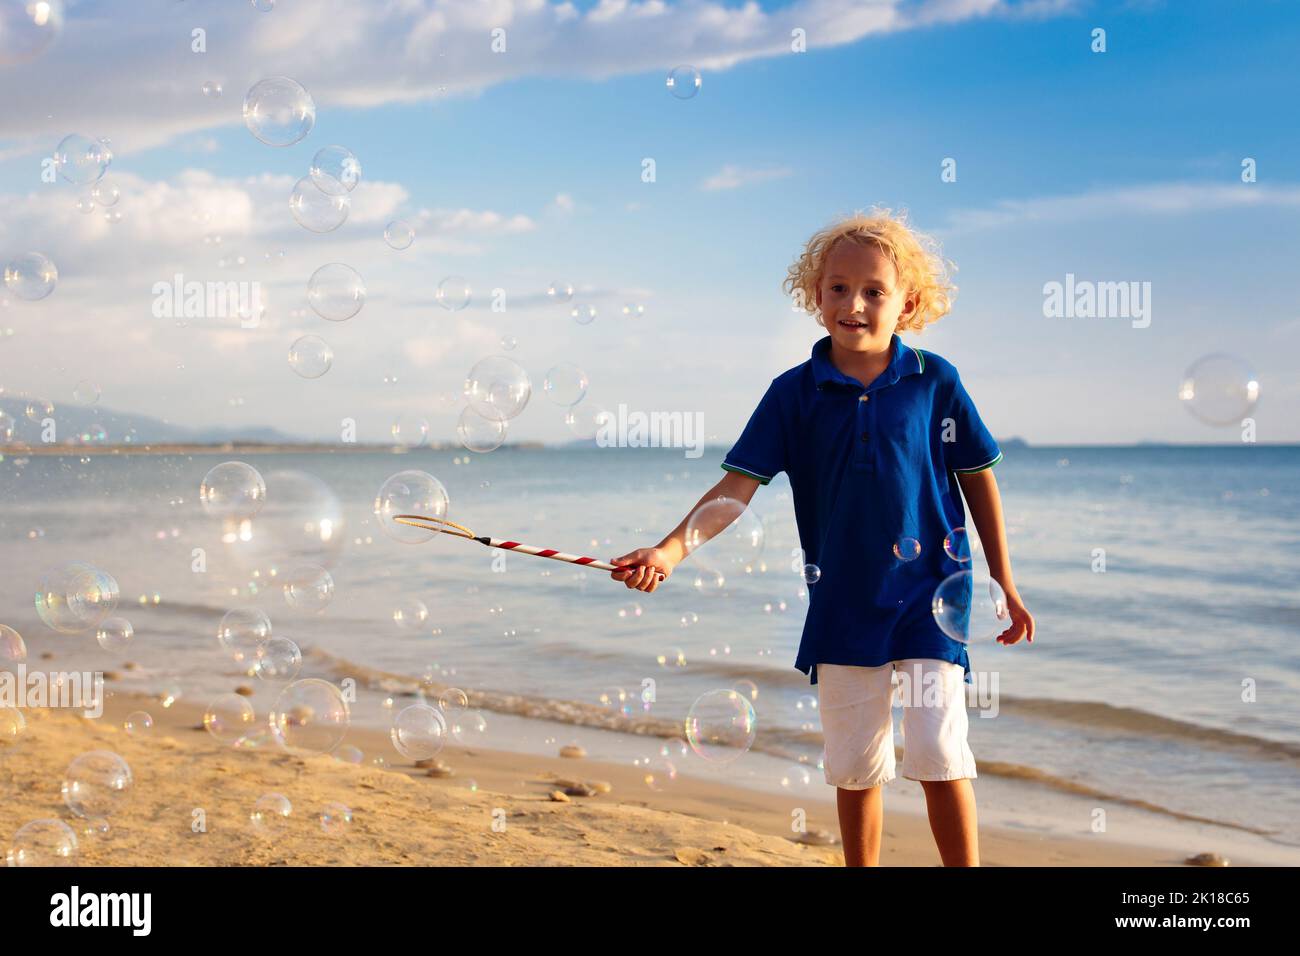 Kids blow bubbles at tropical beach. Child blowing soap bubble playing at sea. Family summer vacation with young kid. Outdoor beach activity for child Stock Photo